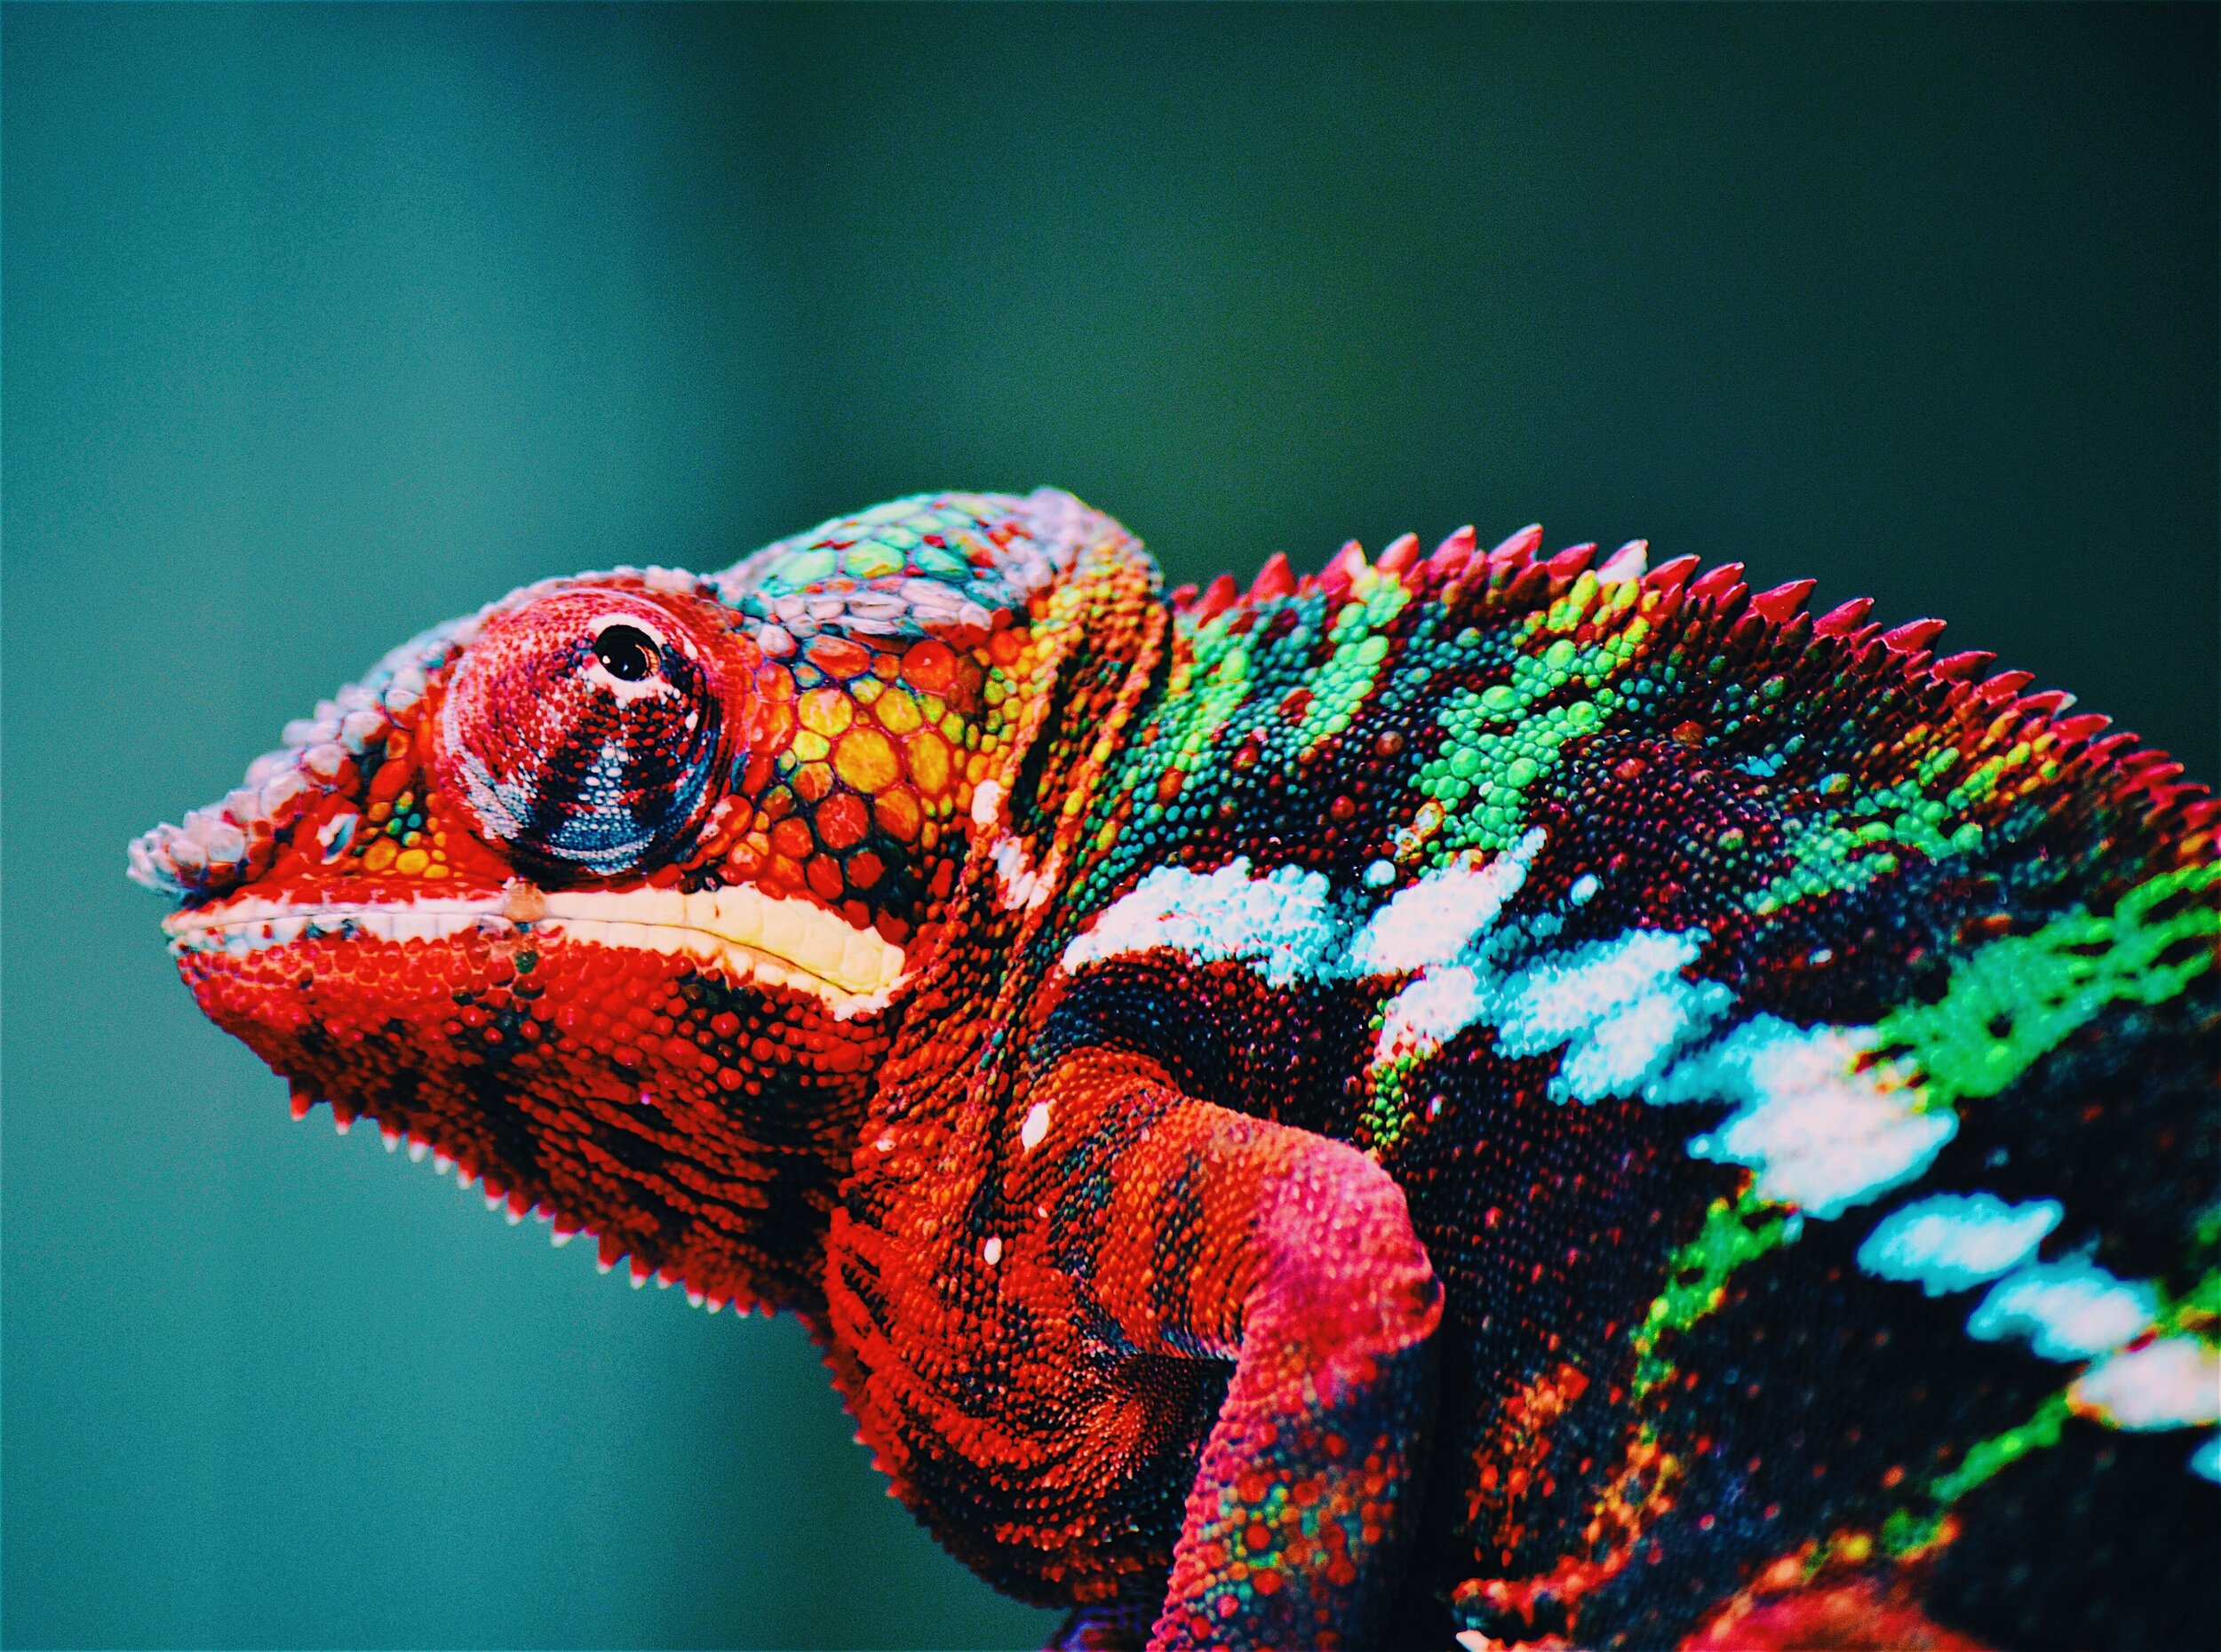 Personality chameleon is what a Social Chameleons